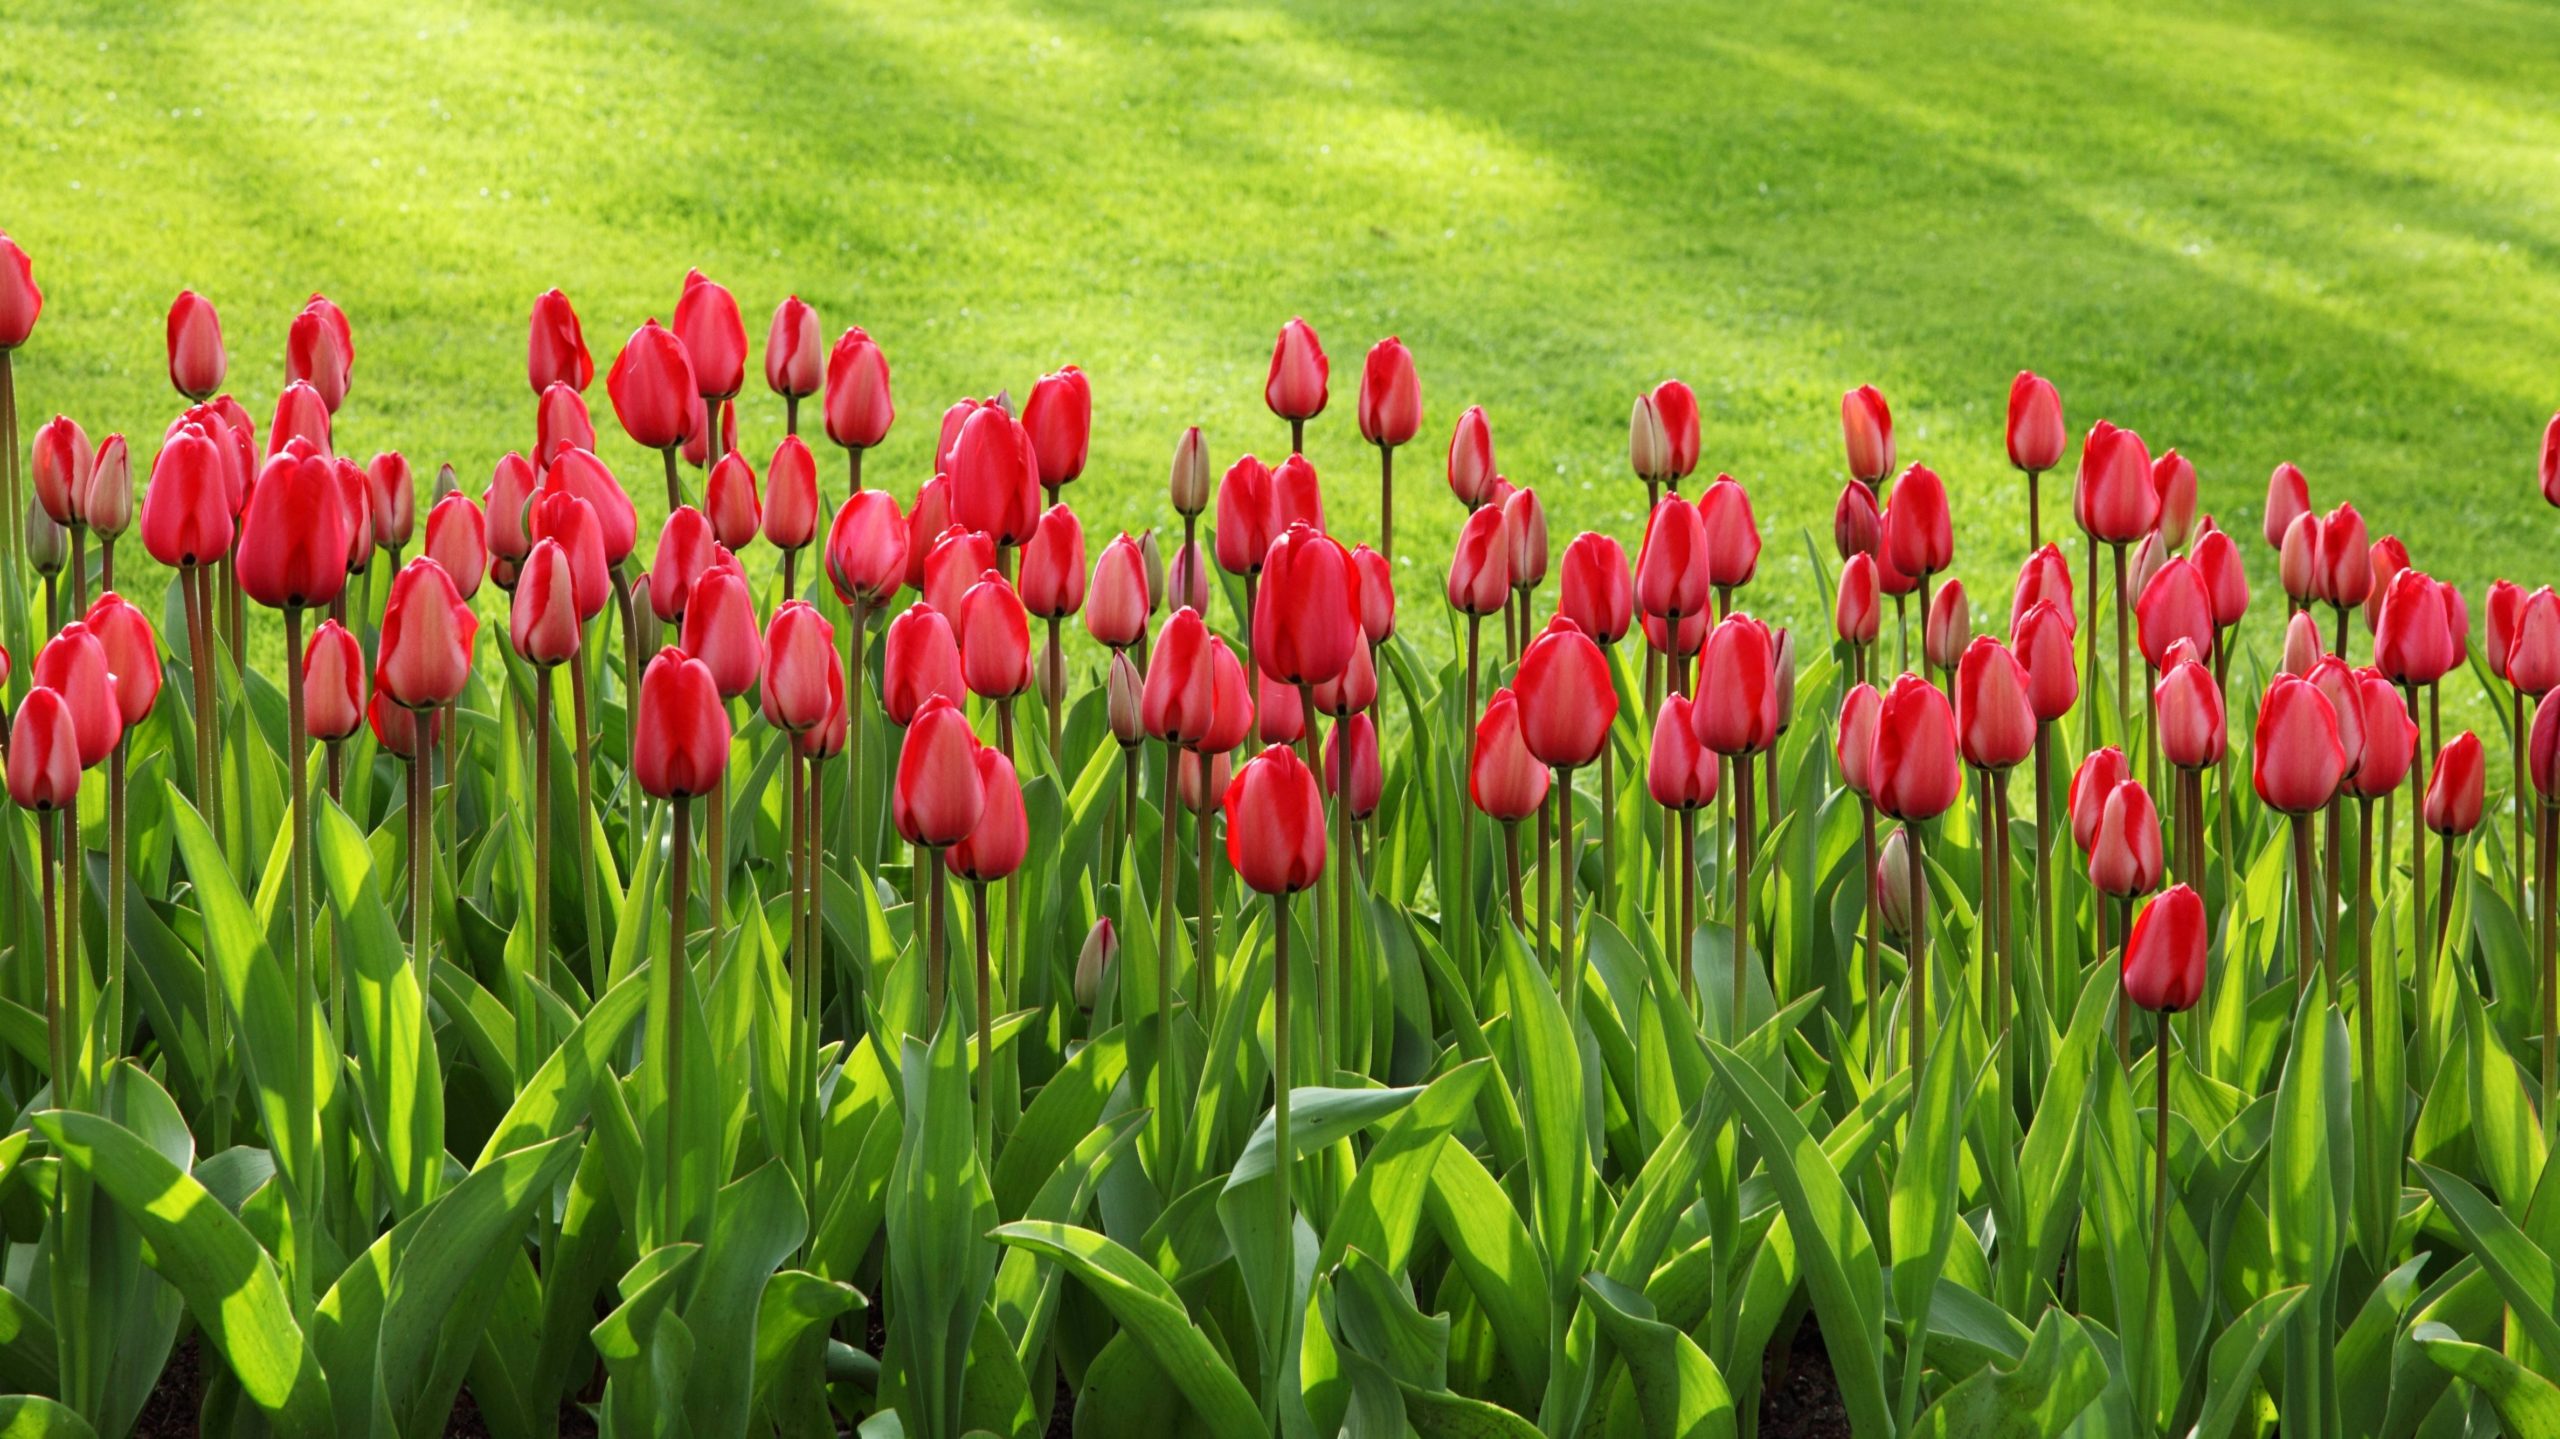 A row of spring flowers with green lawn behind